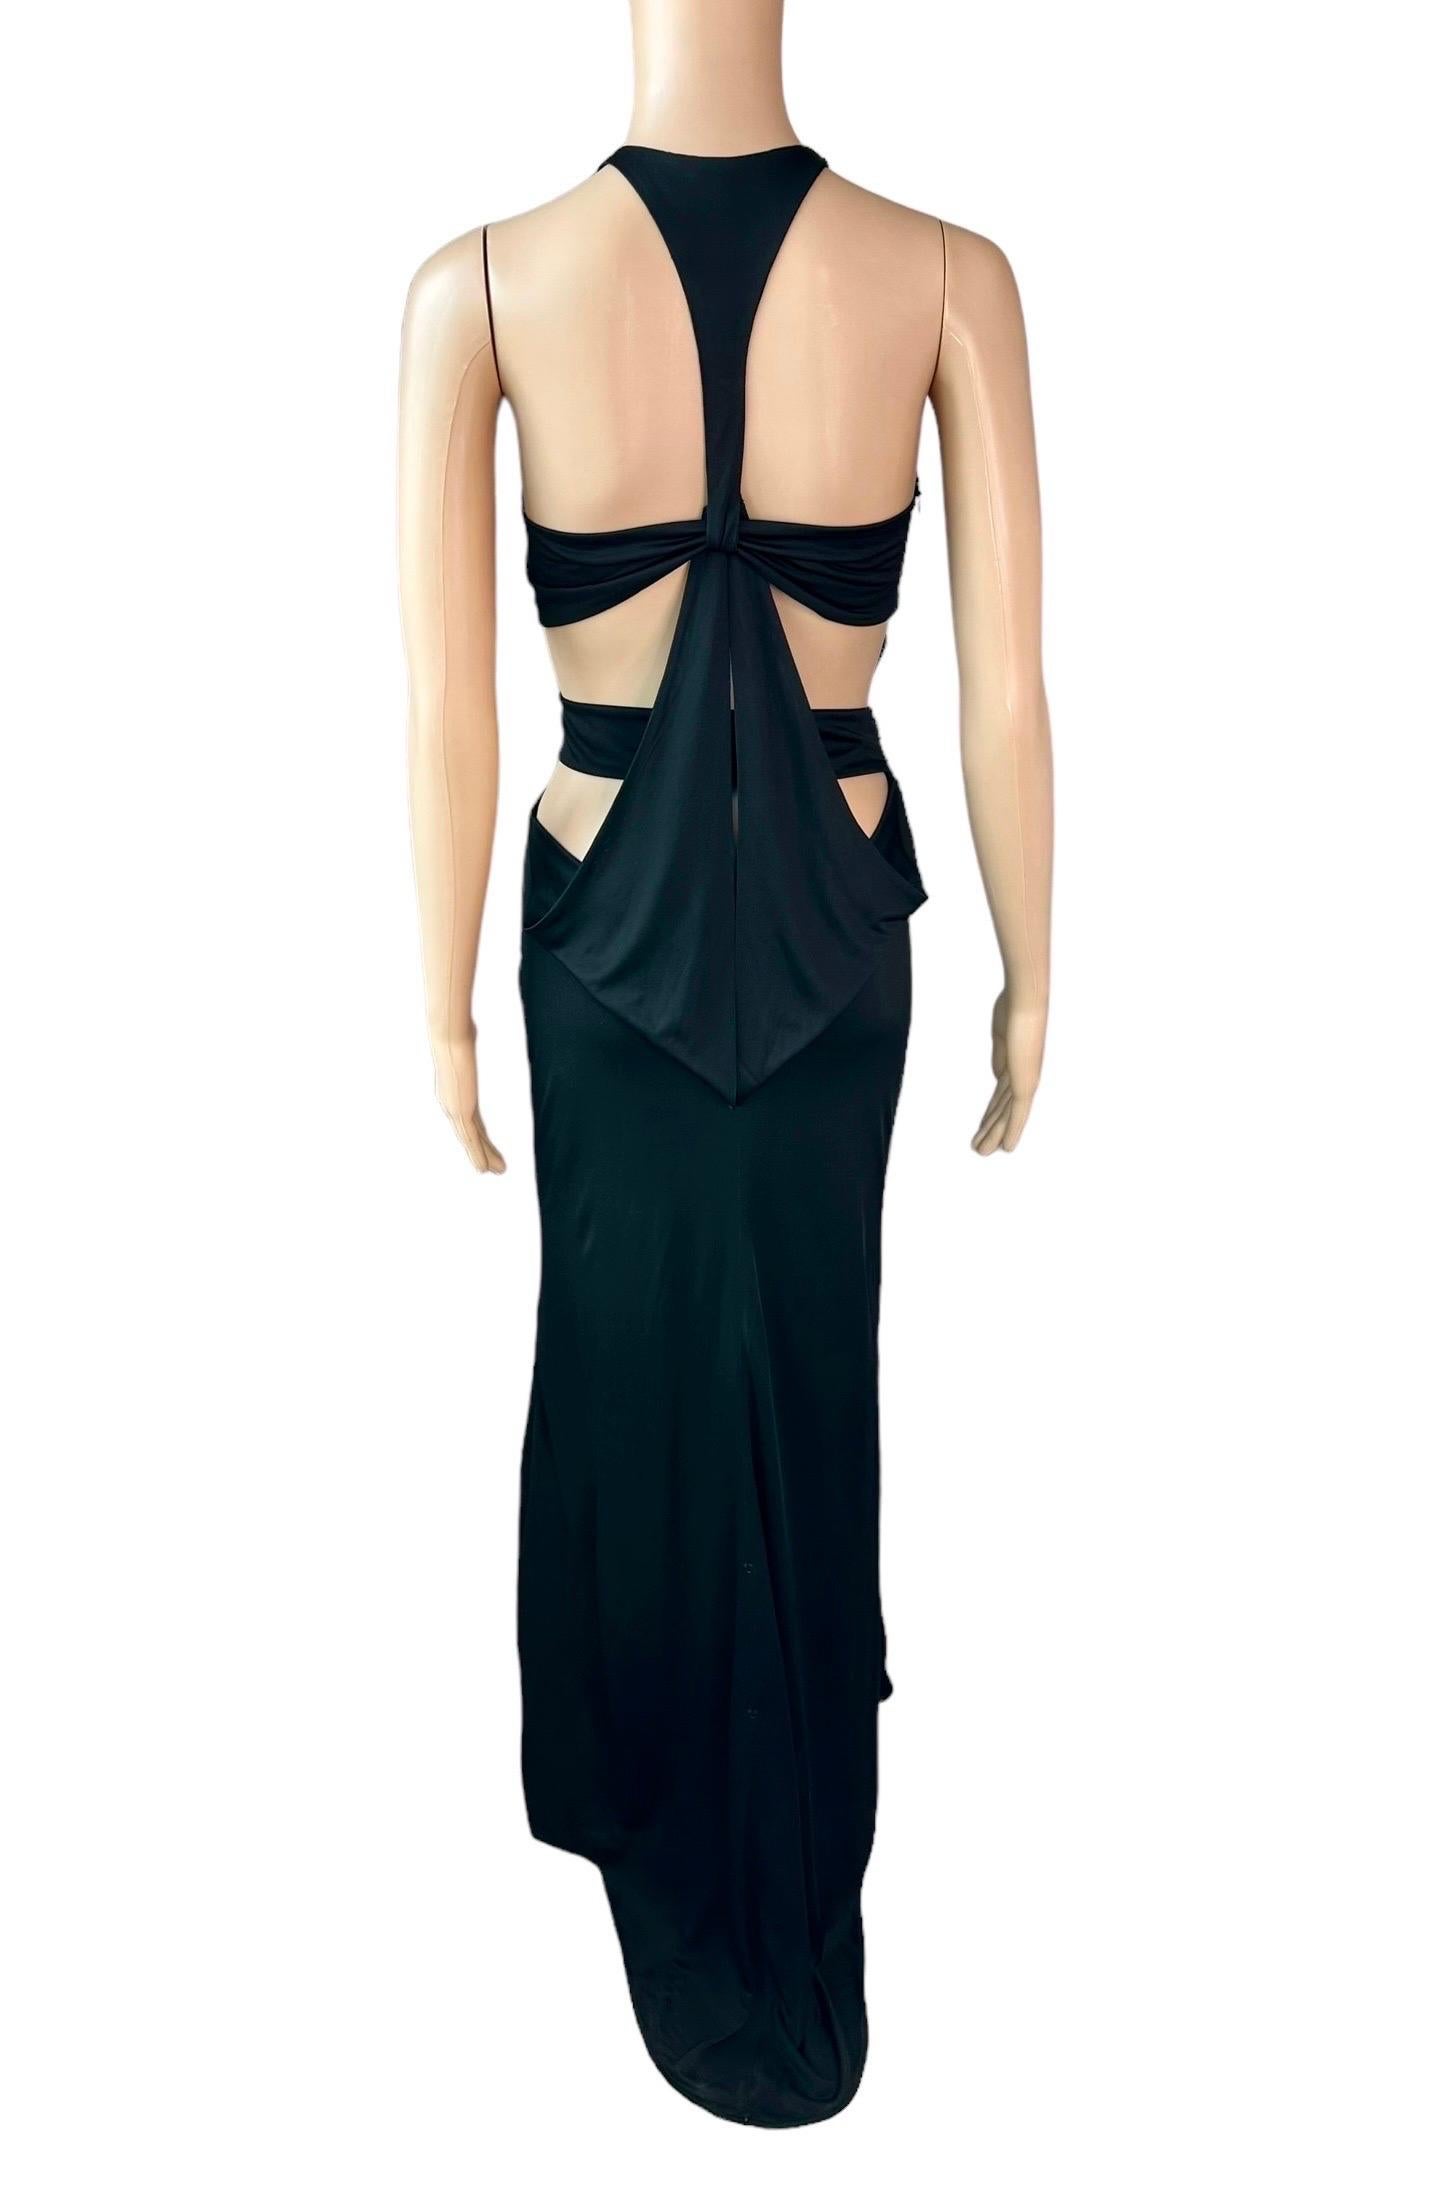 Tom Ford for Gucci F/W 2004 Embellished Plunging Cutout Black Evening Dress Gown In Good Condition In Naples, FL